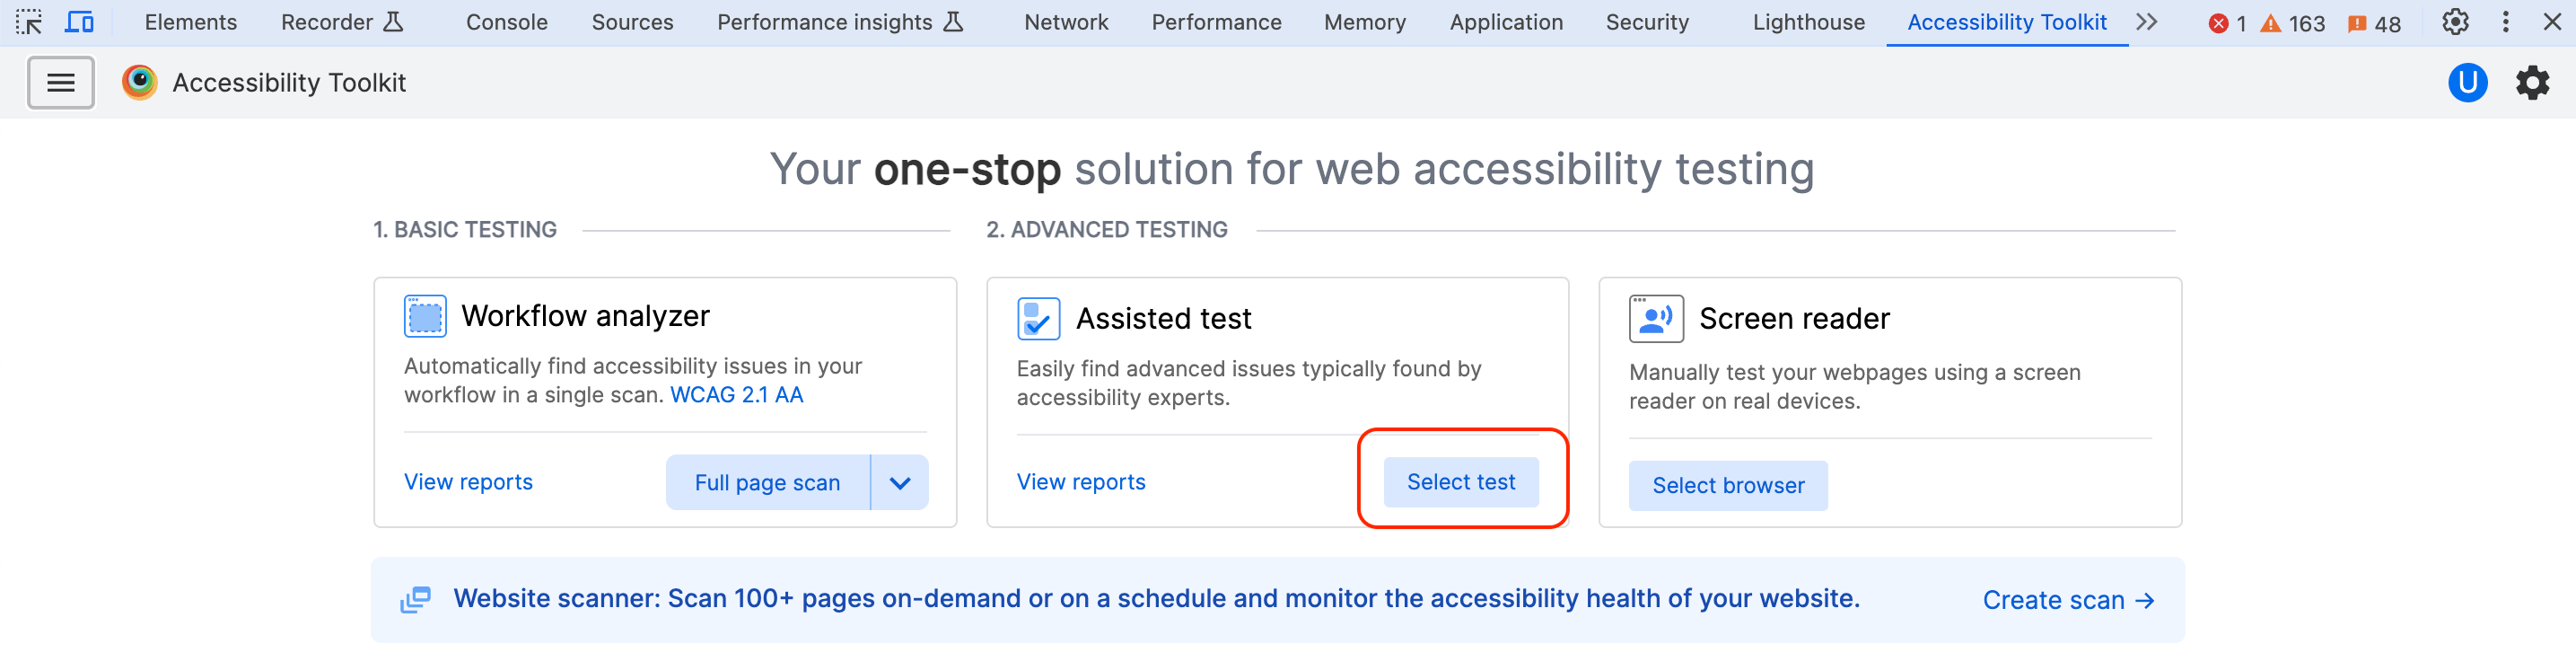 Click Select test to launch an assisted test